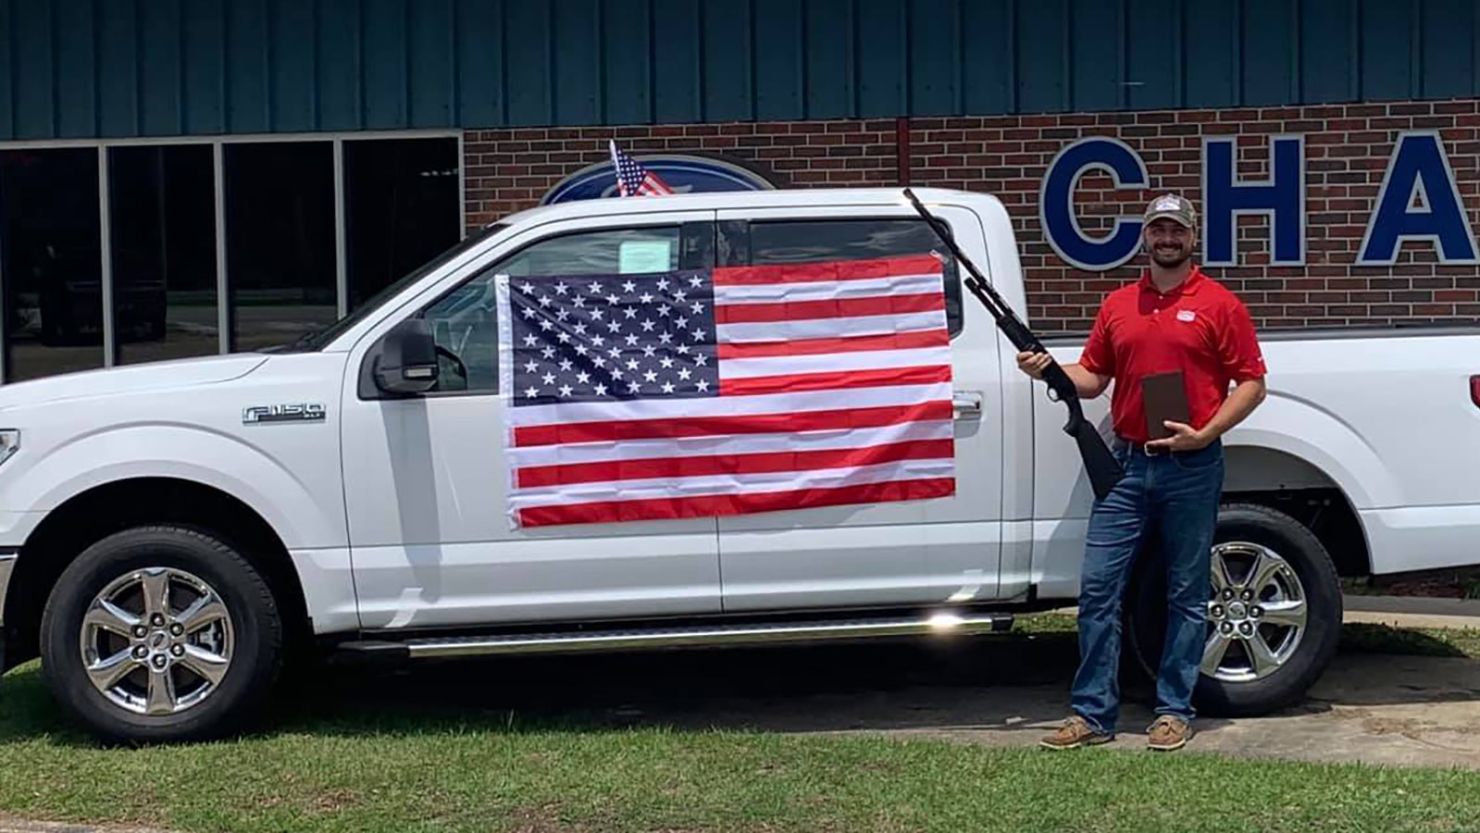 Chatom Ford in Alabama is giving away bibles, American flags and gift certificates for a shotgun to customers who purchase any new or used vehicle throughout July. 